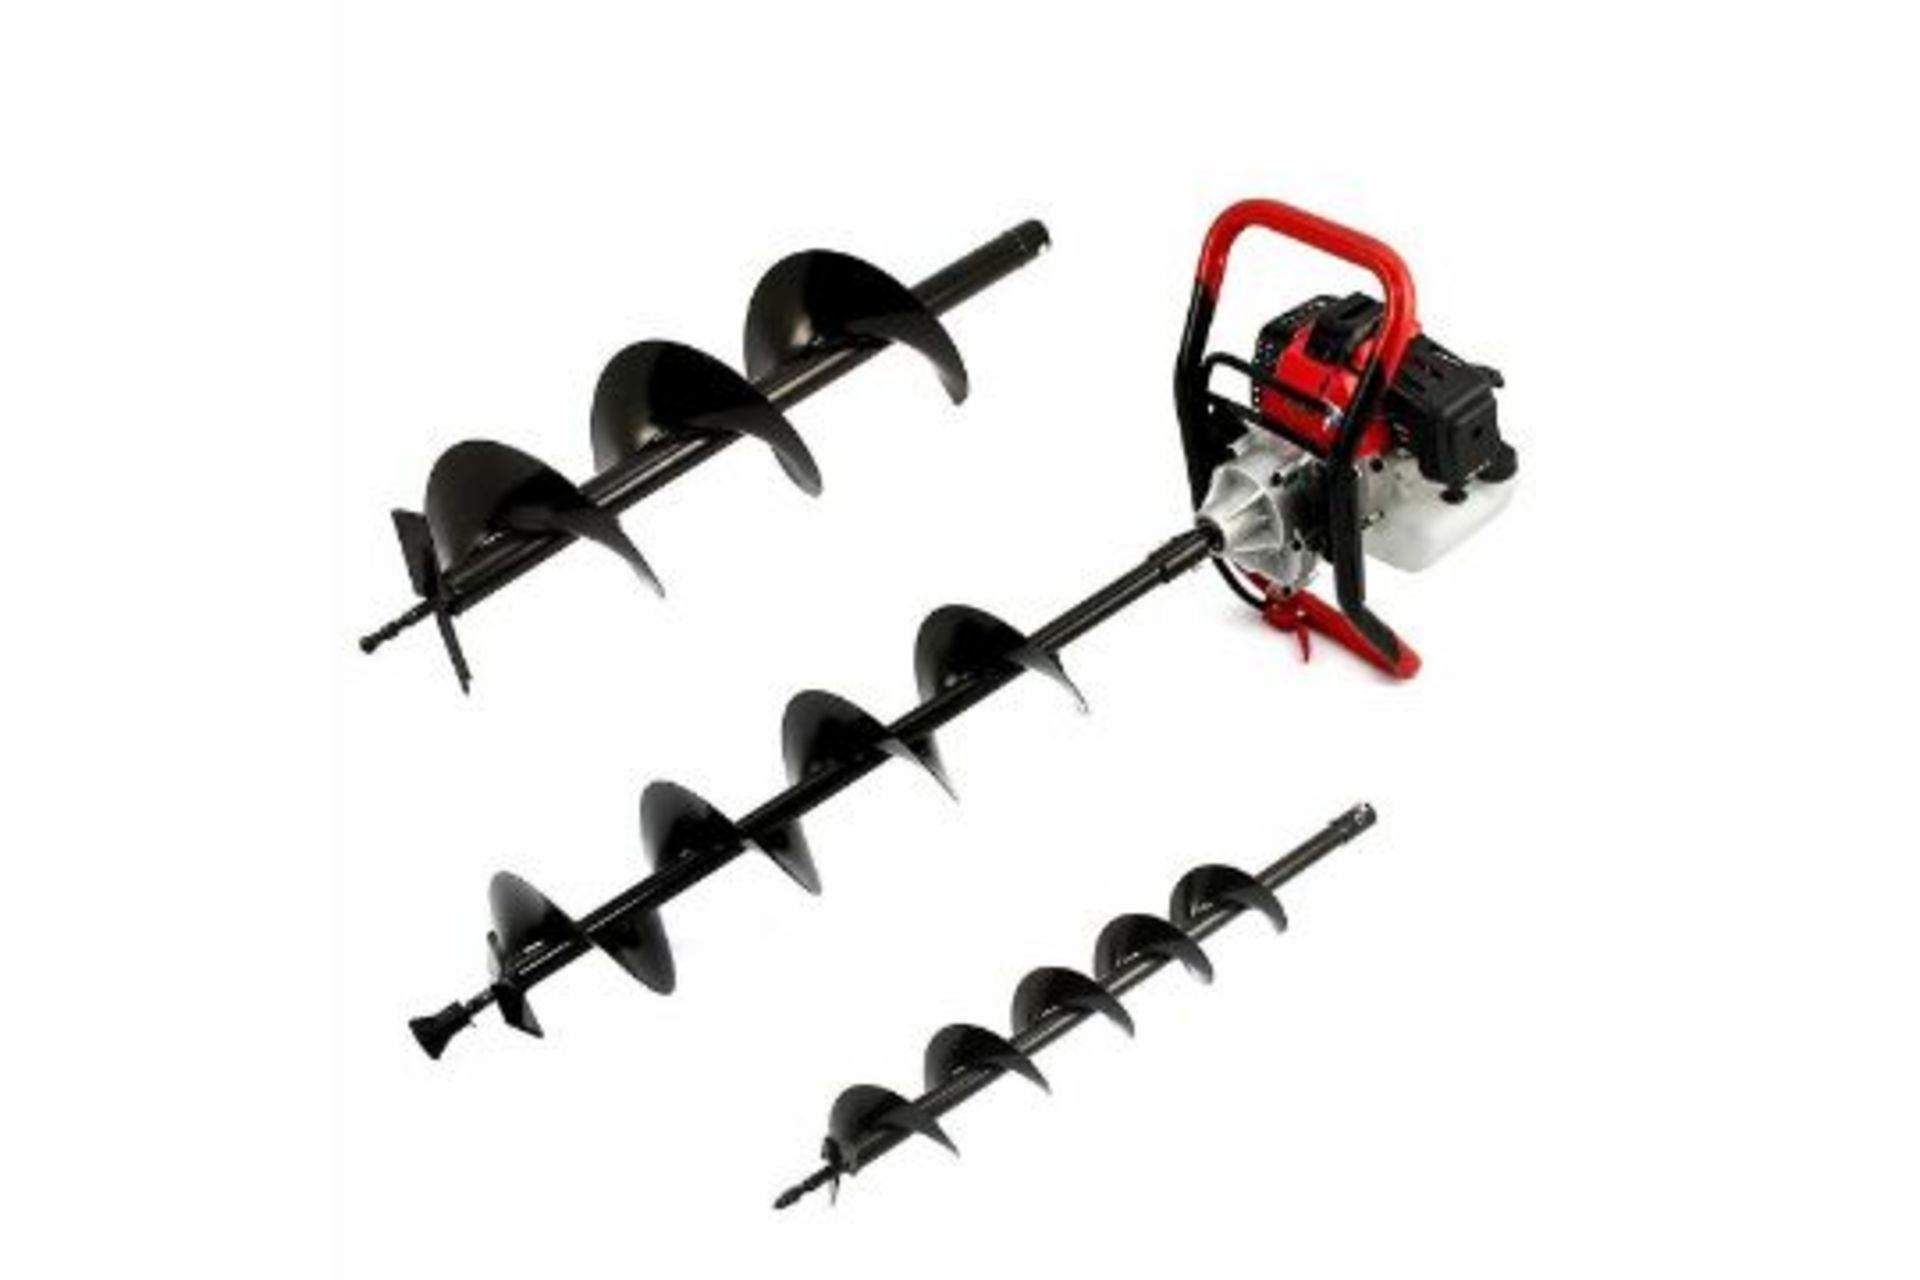 1 x High Performance 65cc Petrol Earth Auger and Fence Post Hole Borer - Brand New Boxed Stock - - Image 5 of 5